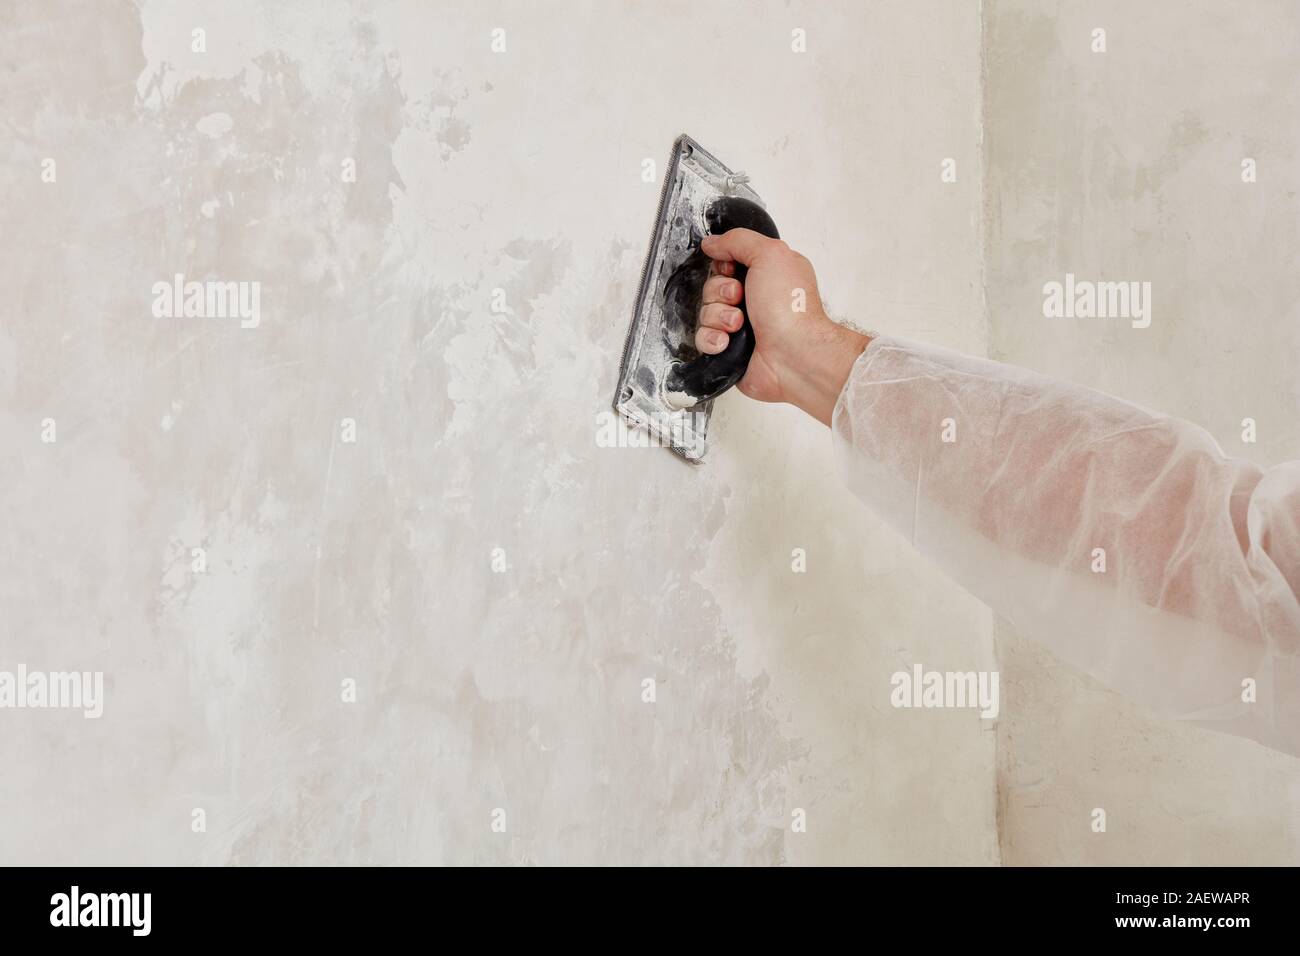 Hand of a man sanding a wall after plastering Stock Photo